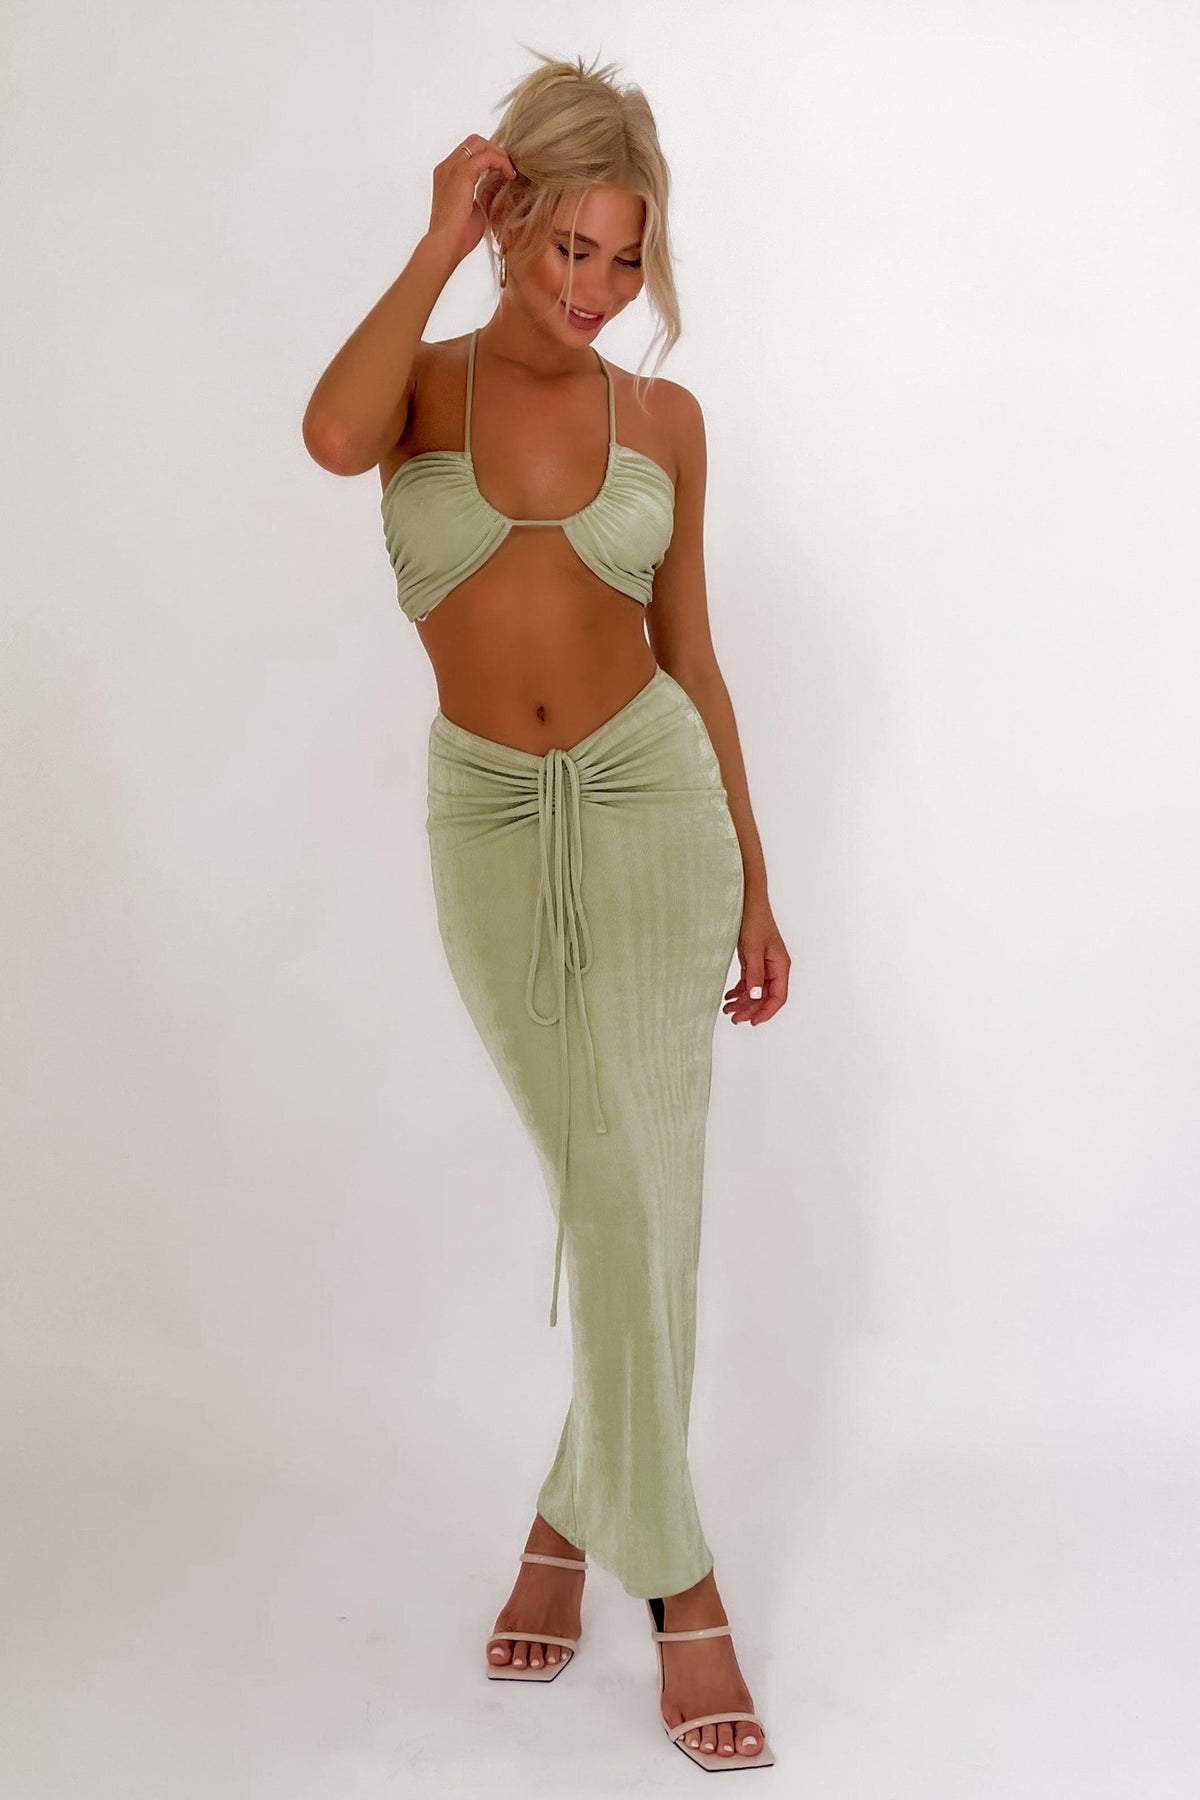 Ayrah Top, CROP TOPS, GREEN, POLYESTER &amp; SPANDEX, POLYESTER AND SPANDEX, Sale, SPANDEX &amp; POLYESTER, SPANDEX AND POLYESTER, TOP, TOPS, Our New Ayrah Top Is Now Only $41.00 Exclusive At Mishkah, Our New Ayrah Top is now only $41.00-We Have The Latest Women&#39;s Tops @ Mishkah Online Fashion Boutique-MISHKAH